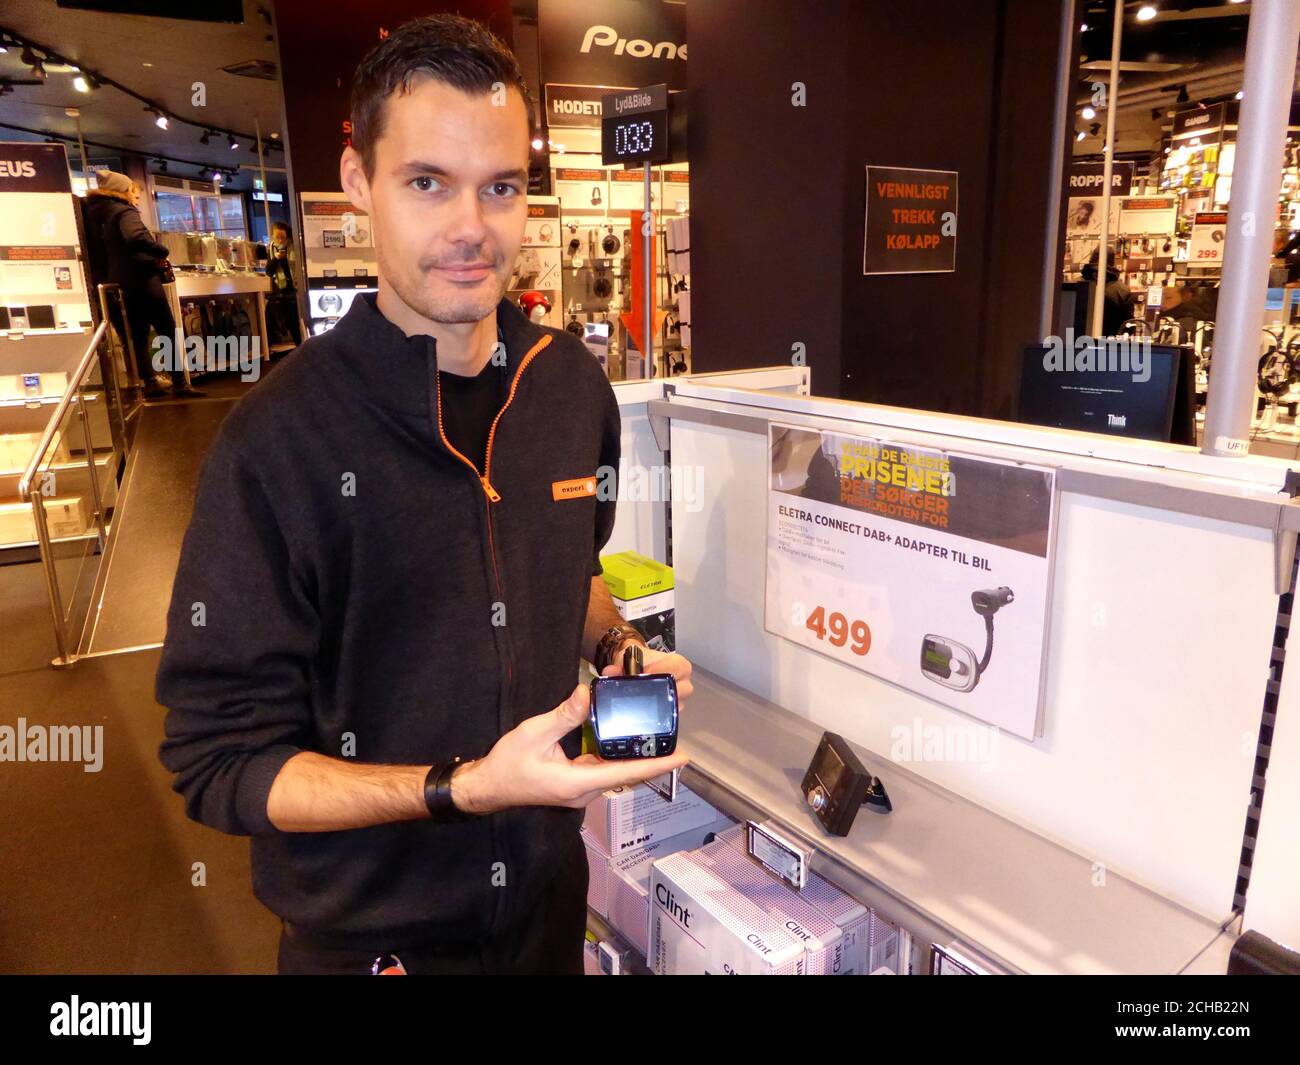 Worker Ino Andre Nilsen shows an adapter that can be plugged into a car FM  radio in an Expert City electronics shop in Oslo, Norway January 4, 2017.  Picture taken January 4,